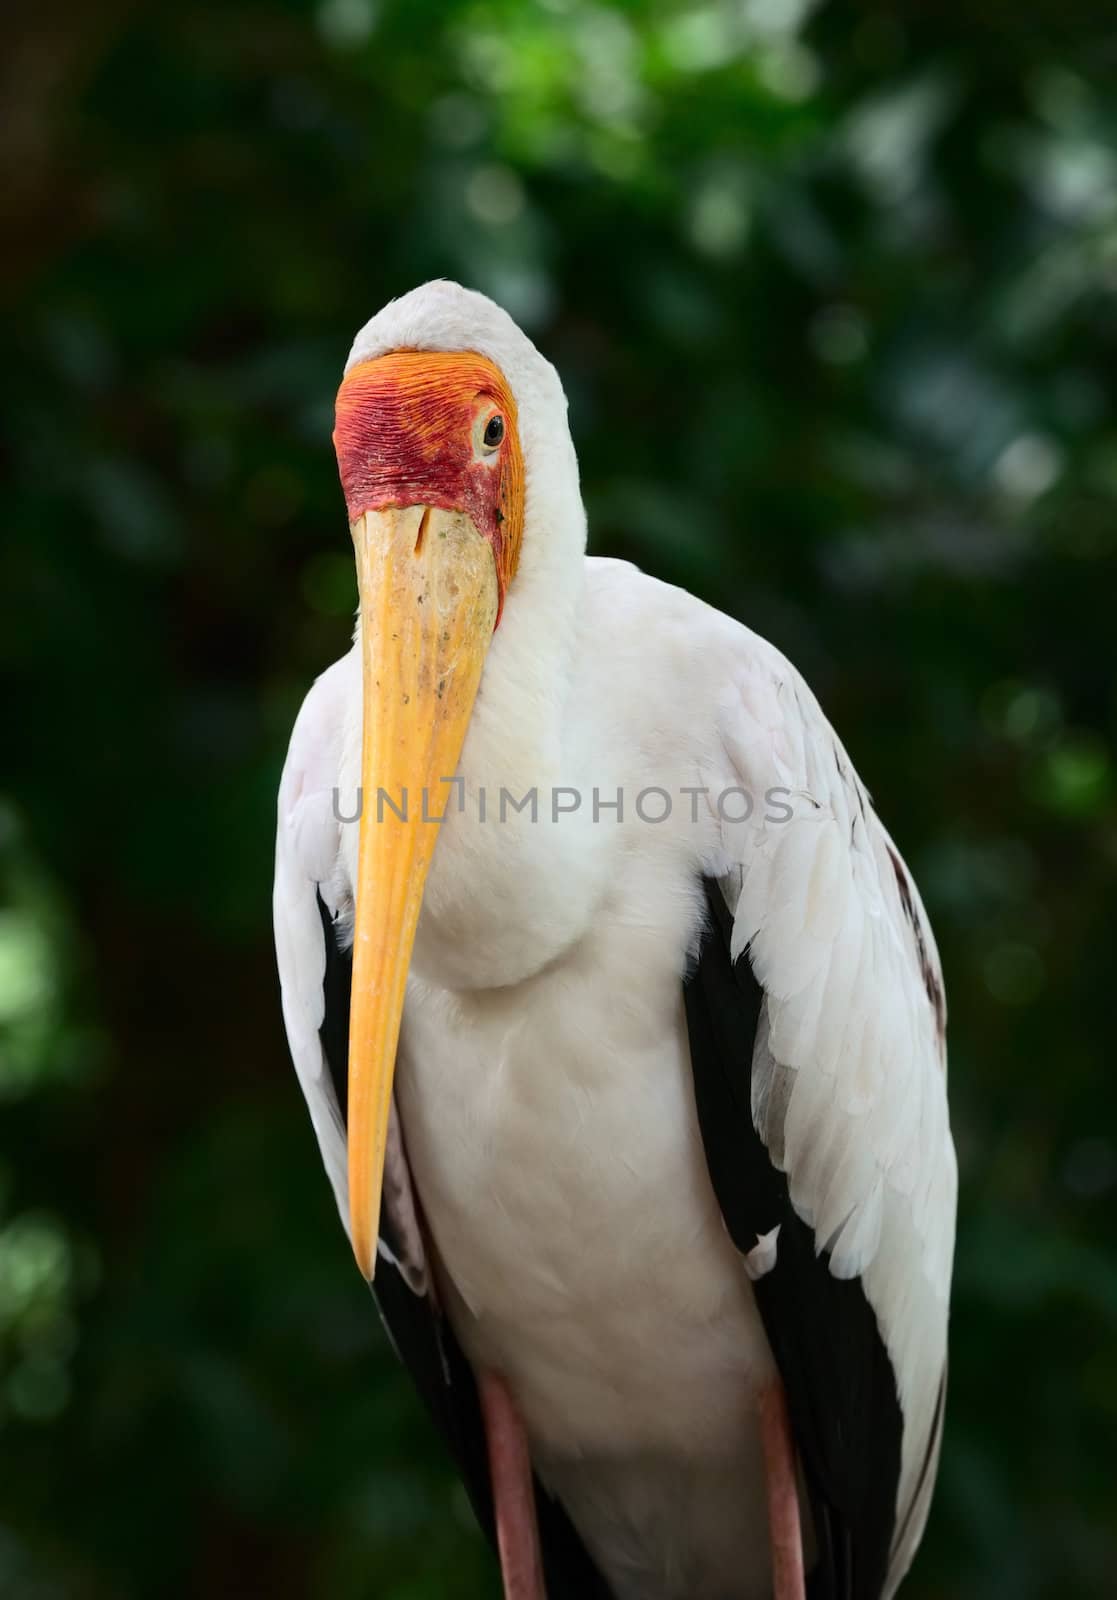 Yellow-billed stork (Mycteria ibis) is a large wading bird in the stork family Ciconiidae.